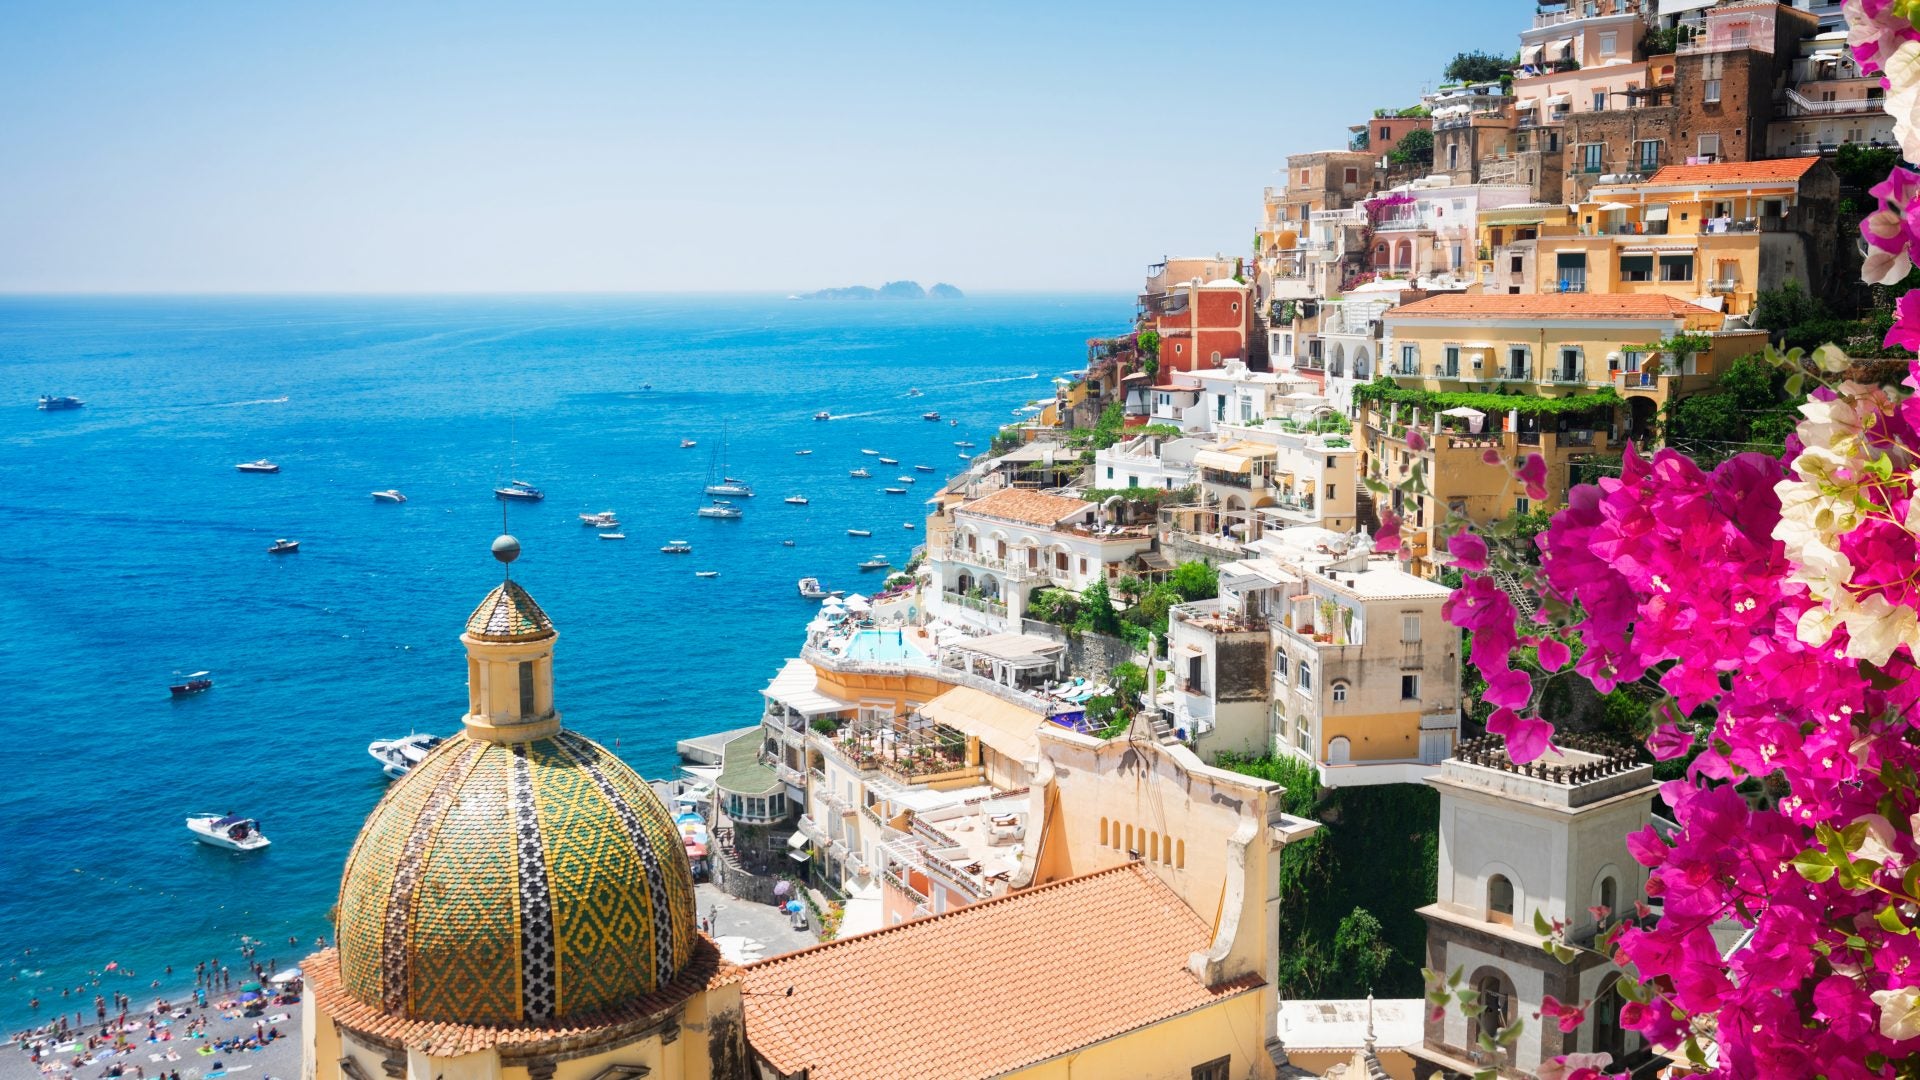 Everything You Need To Plan A Trip To The Amalfi Coast